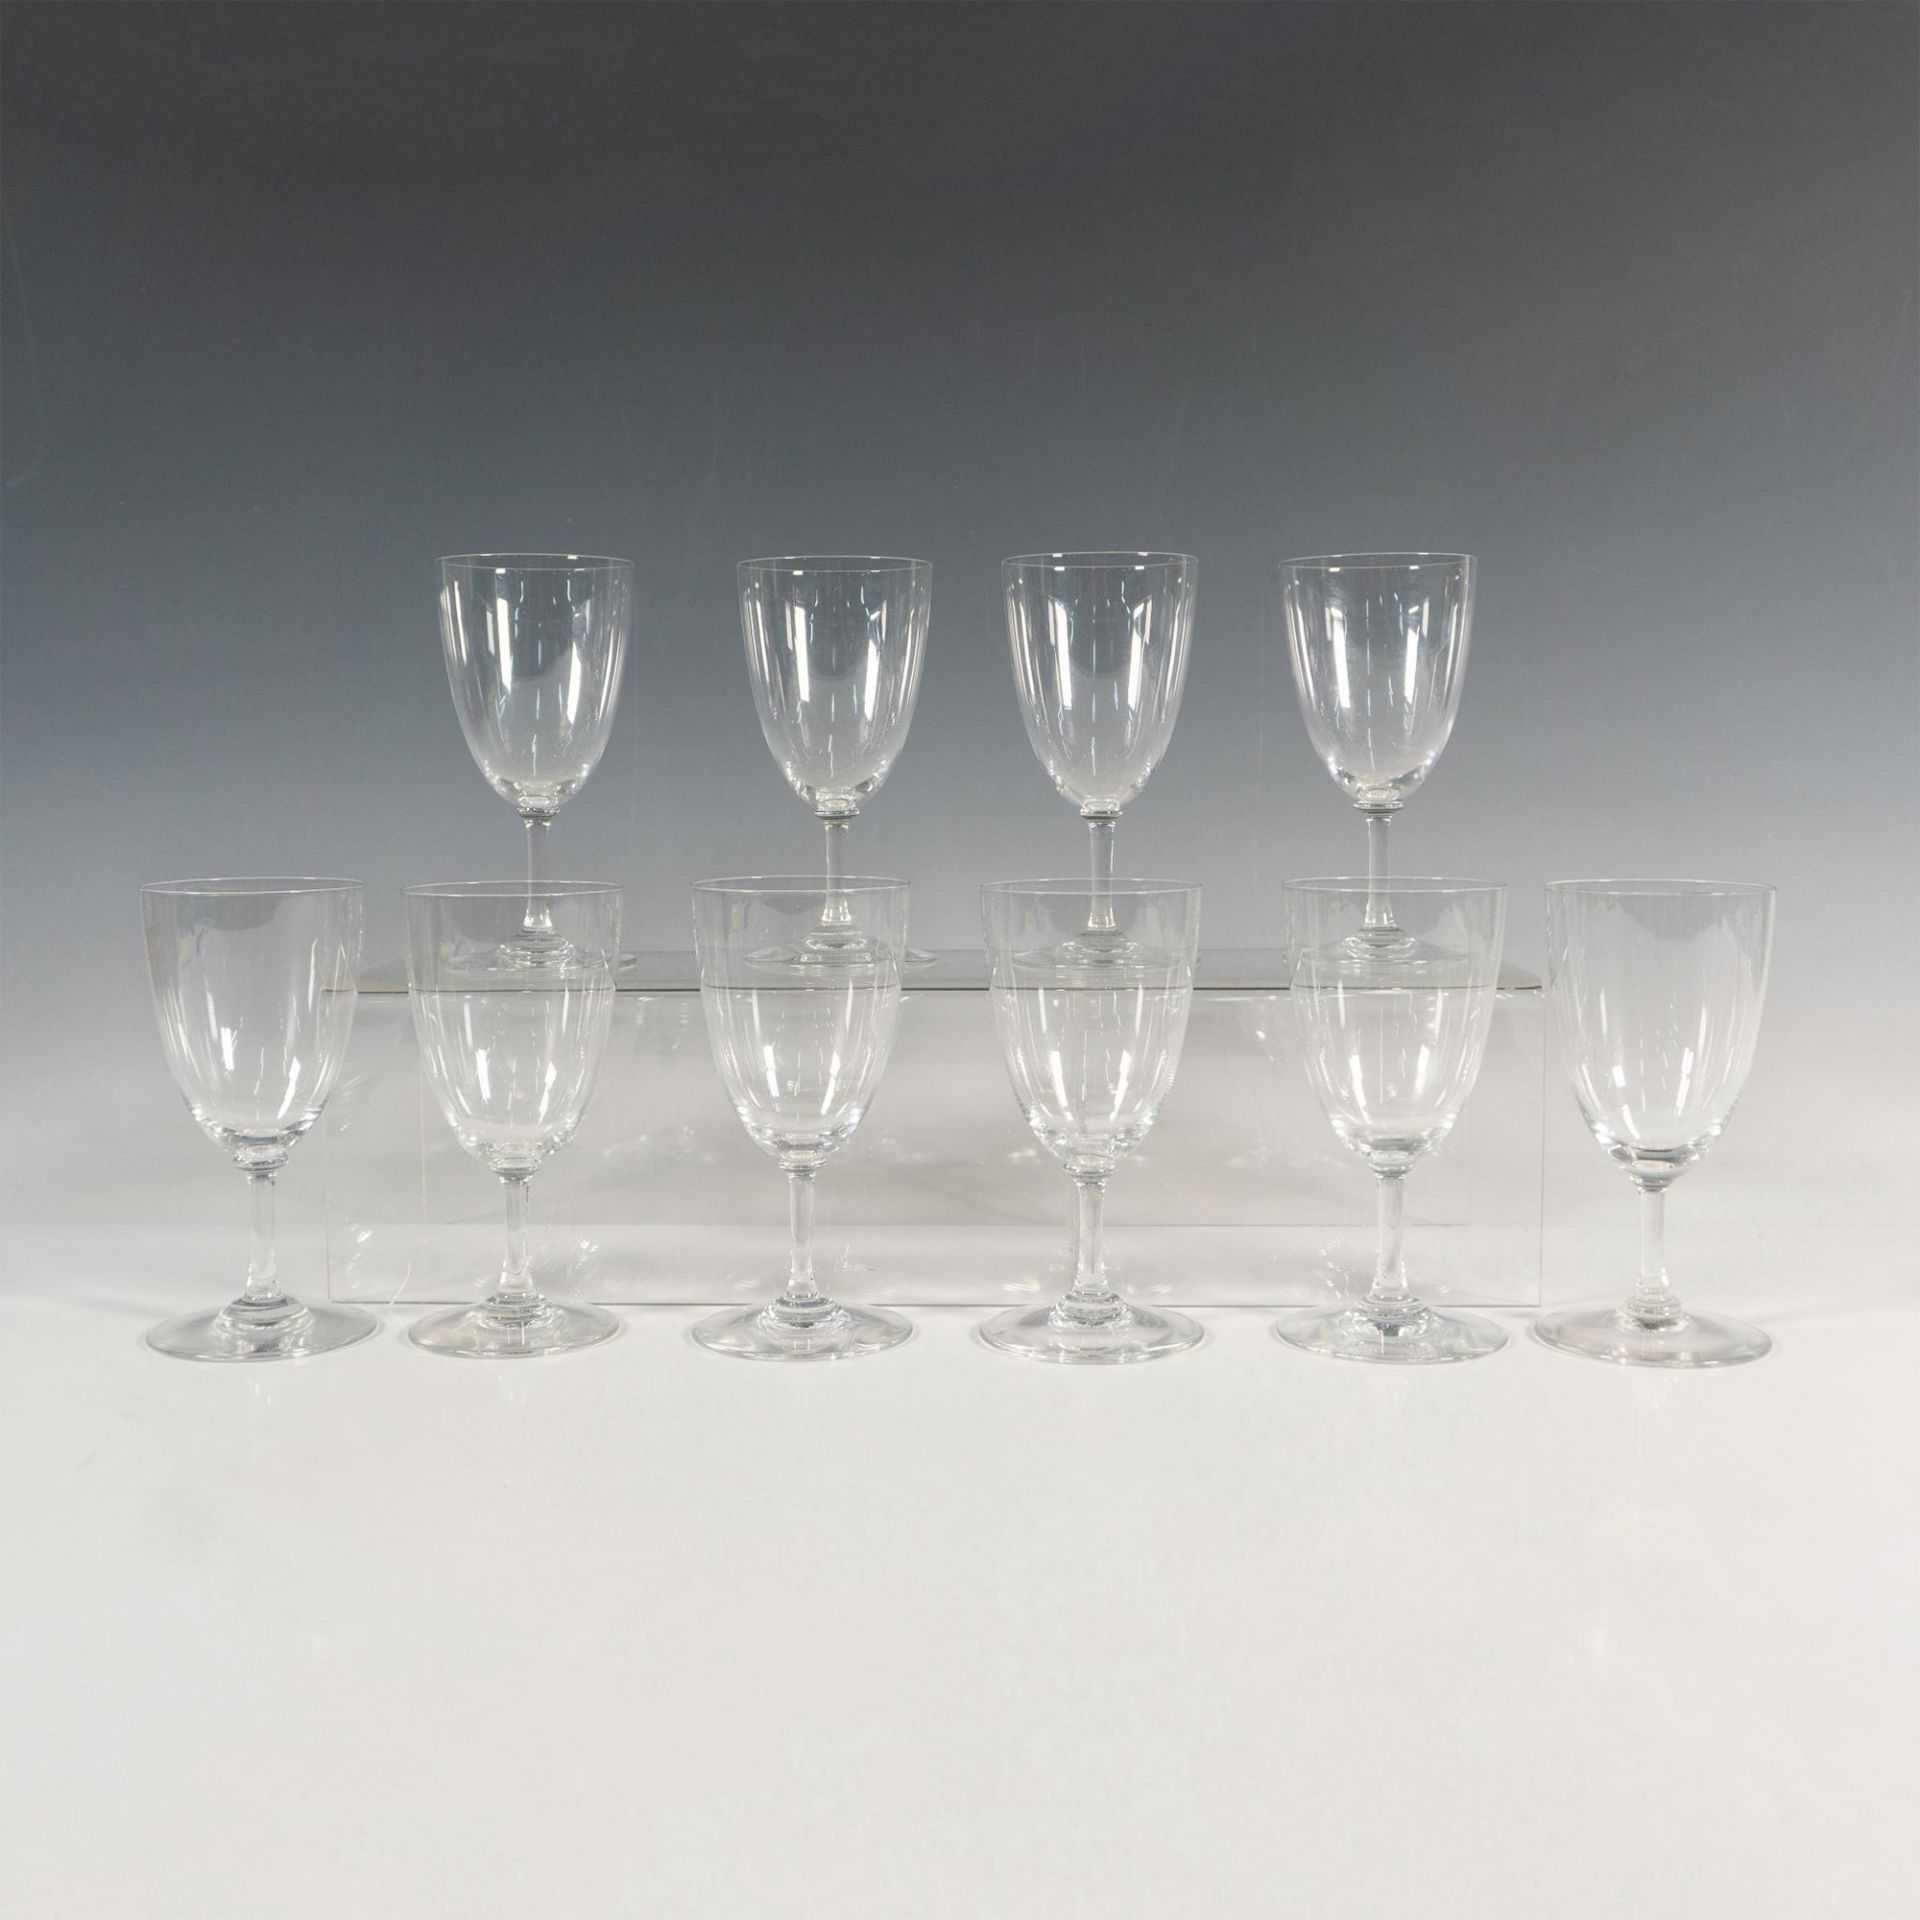 10pc Baccarat Crystal Sherry Glasses